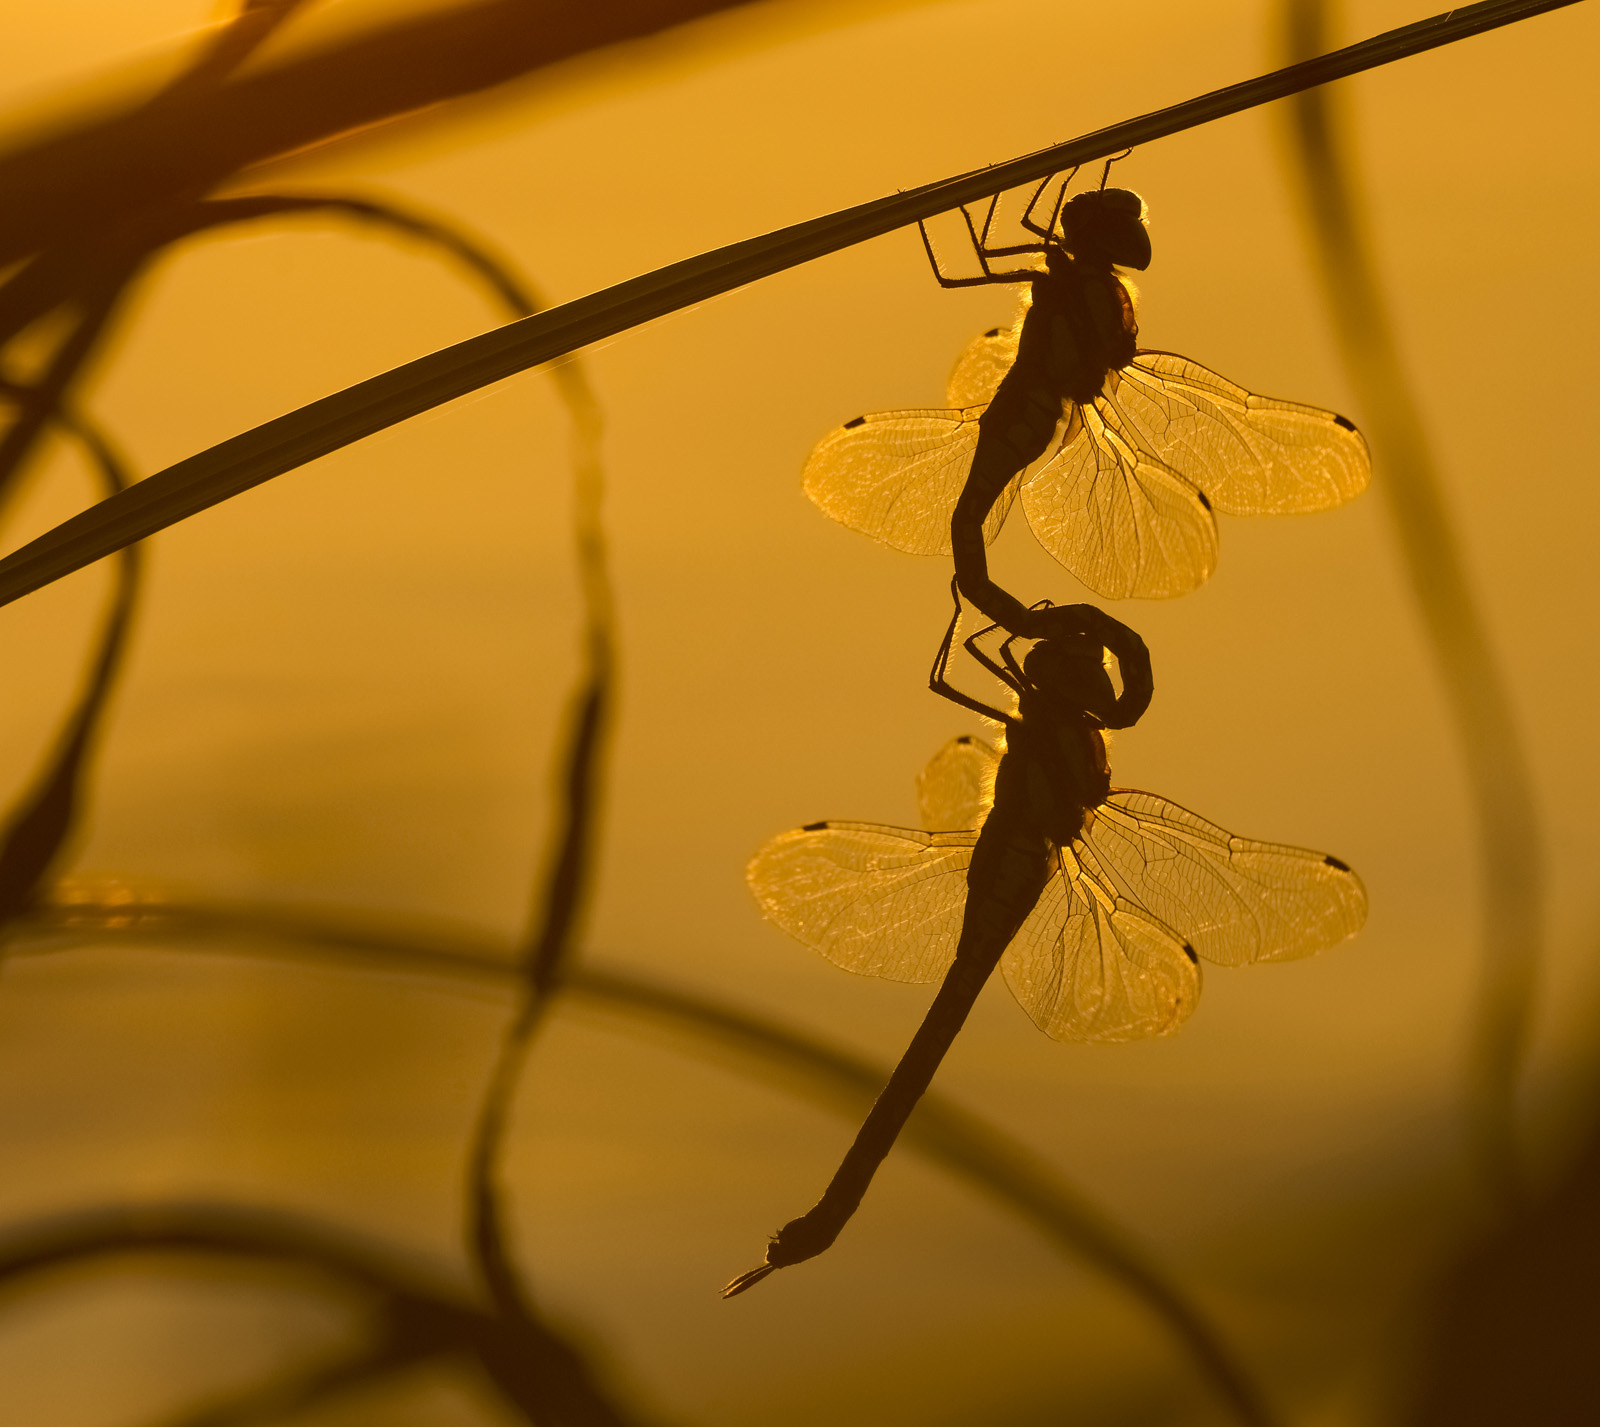 Robert Page Photography - Dragonflies